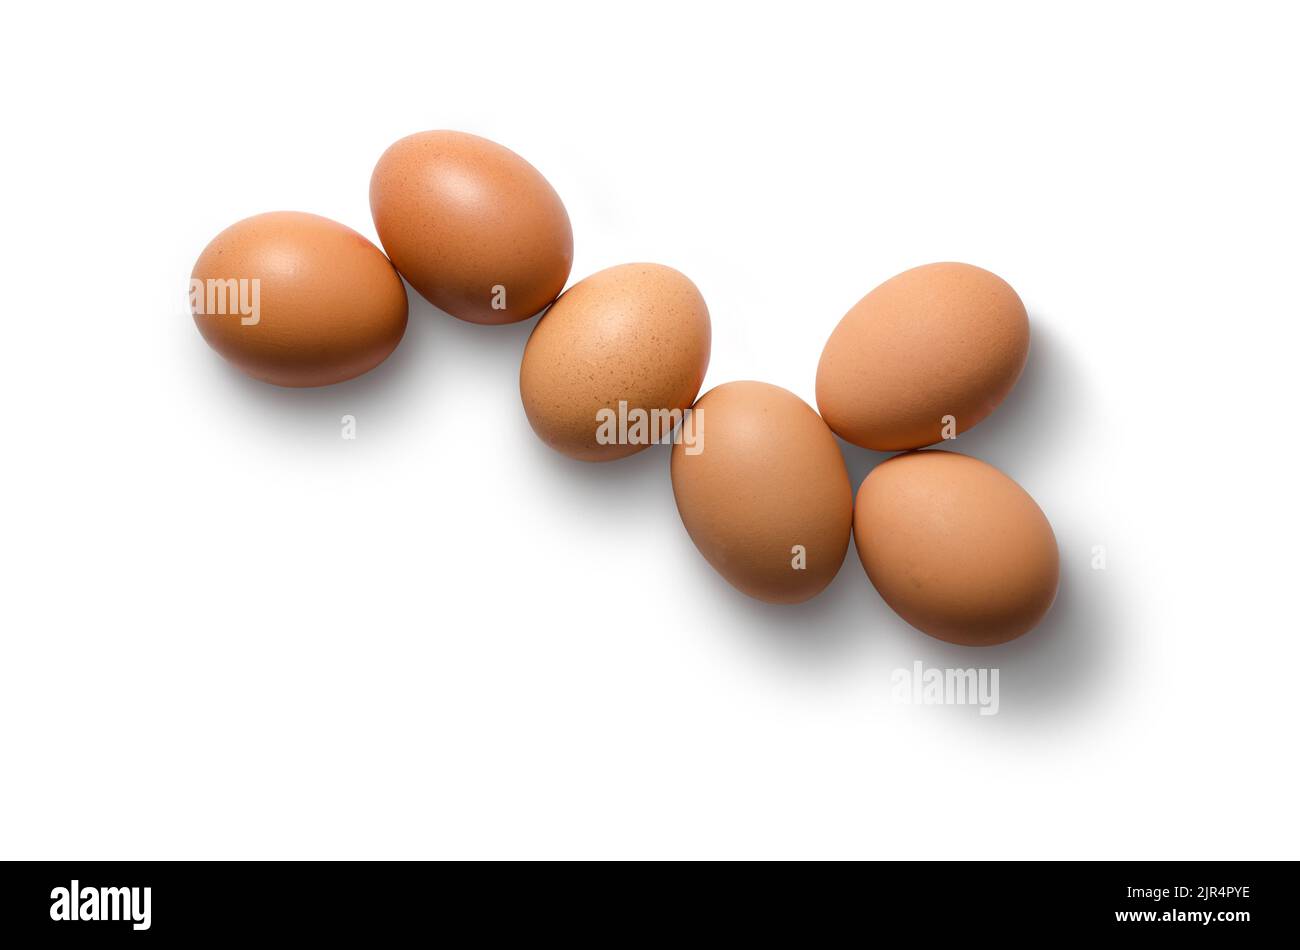 Six brown hens eggs isolated on white background with path Stock Photo